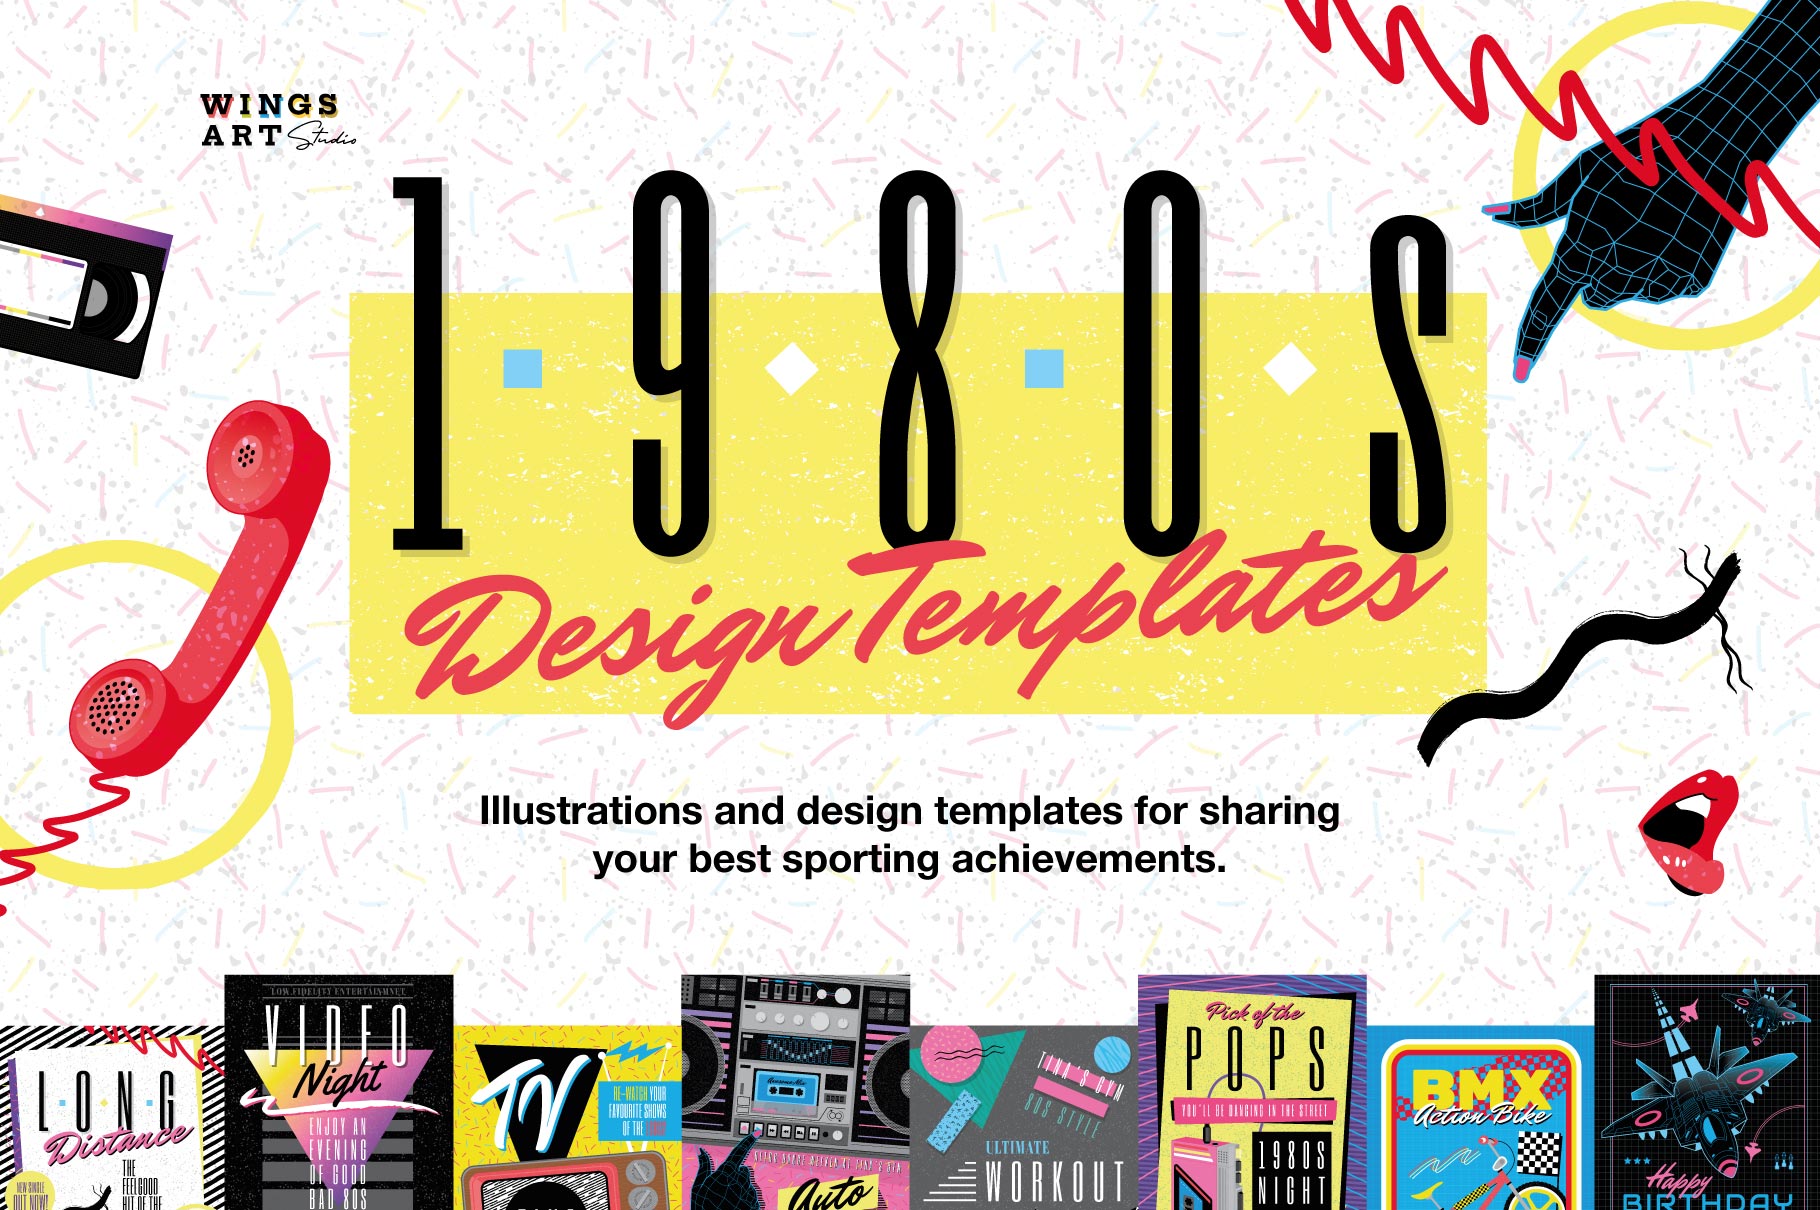 Retro 1980s Inspired Poster Templates for Photoshop and Illustrator